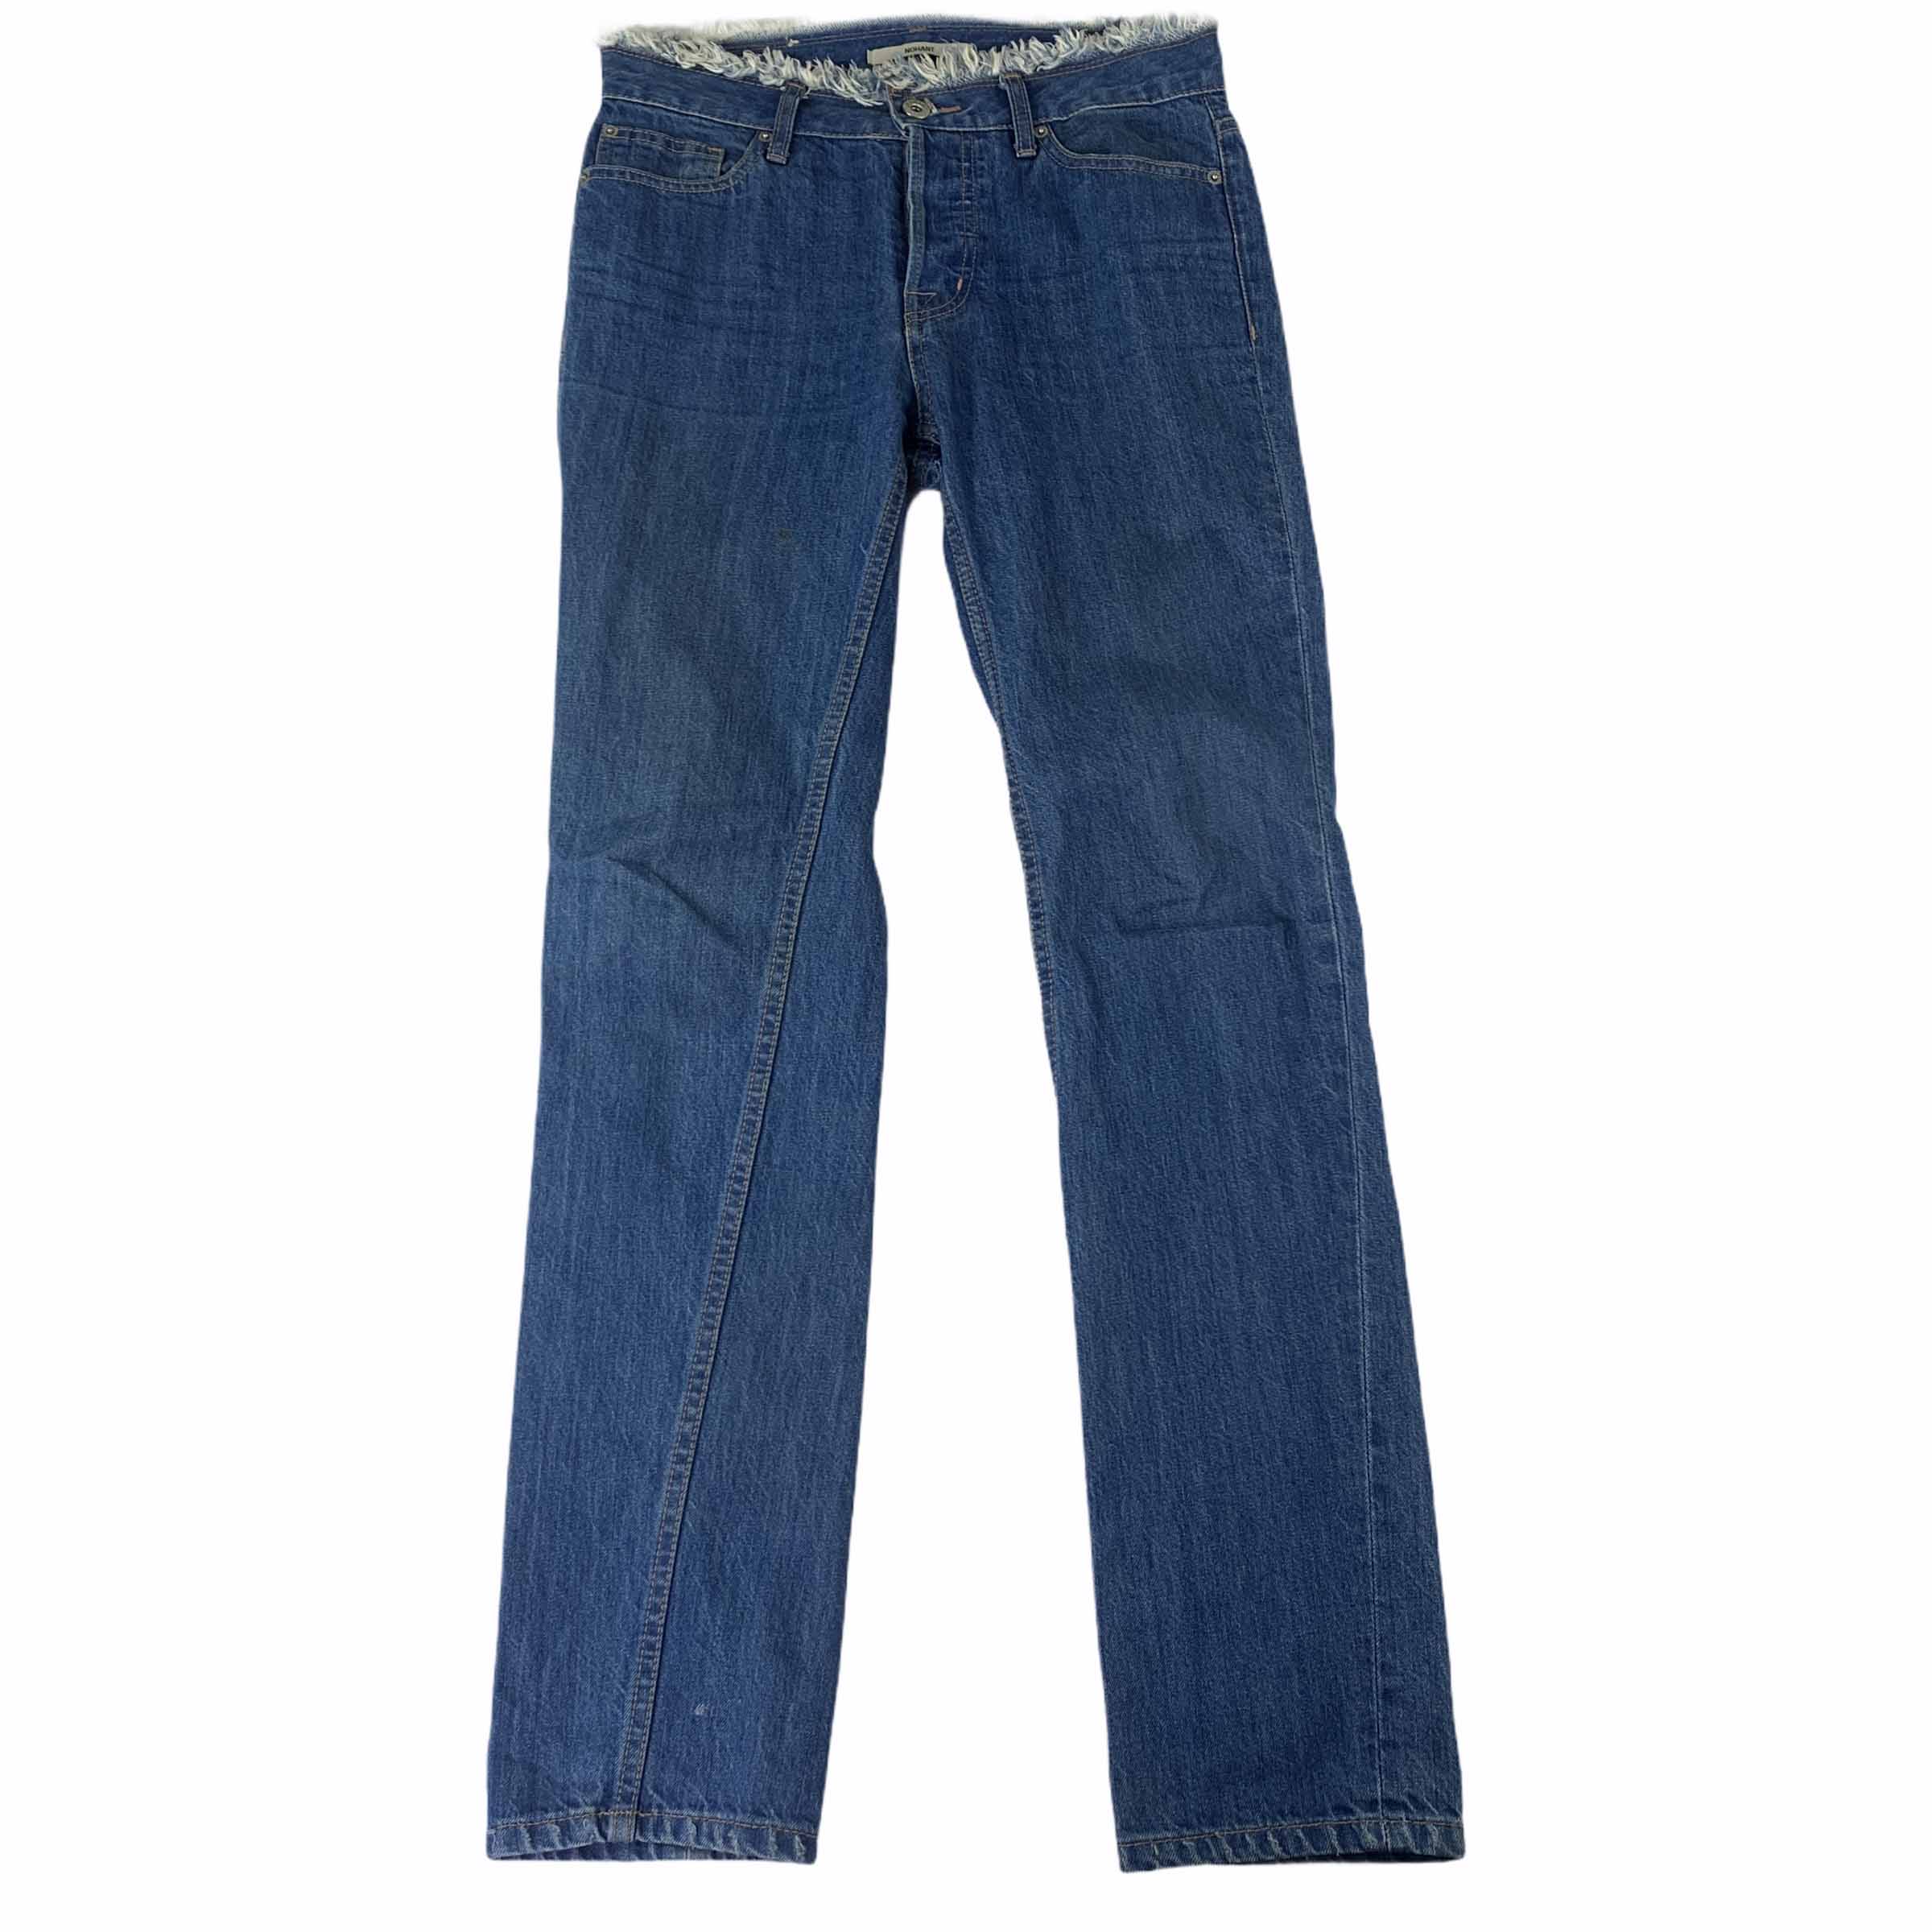 [Nohant] Distressed Waist Detail Jeans - Size M